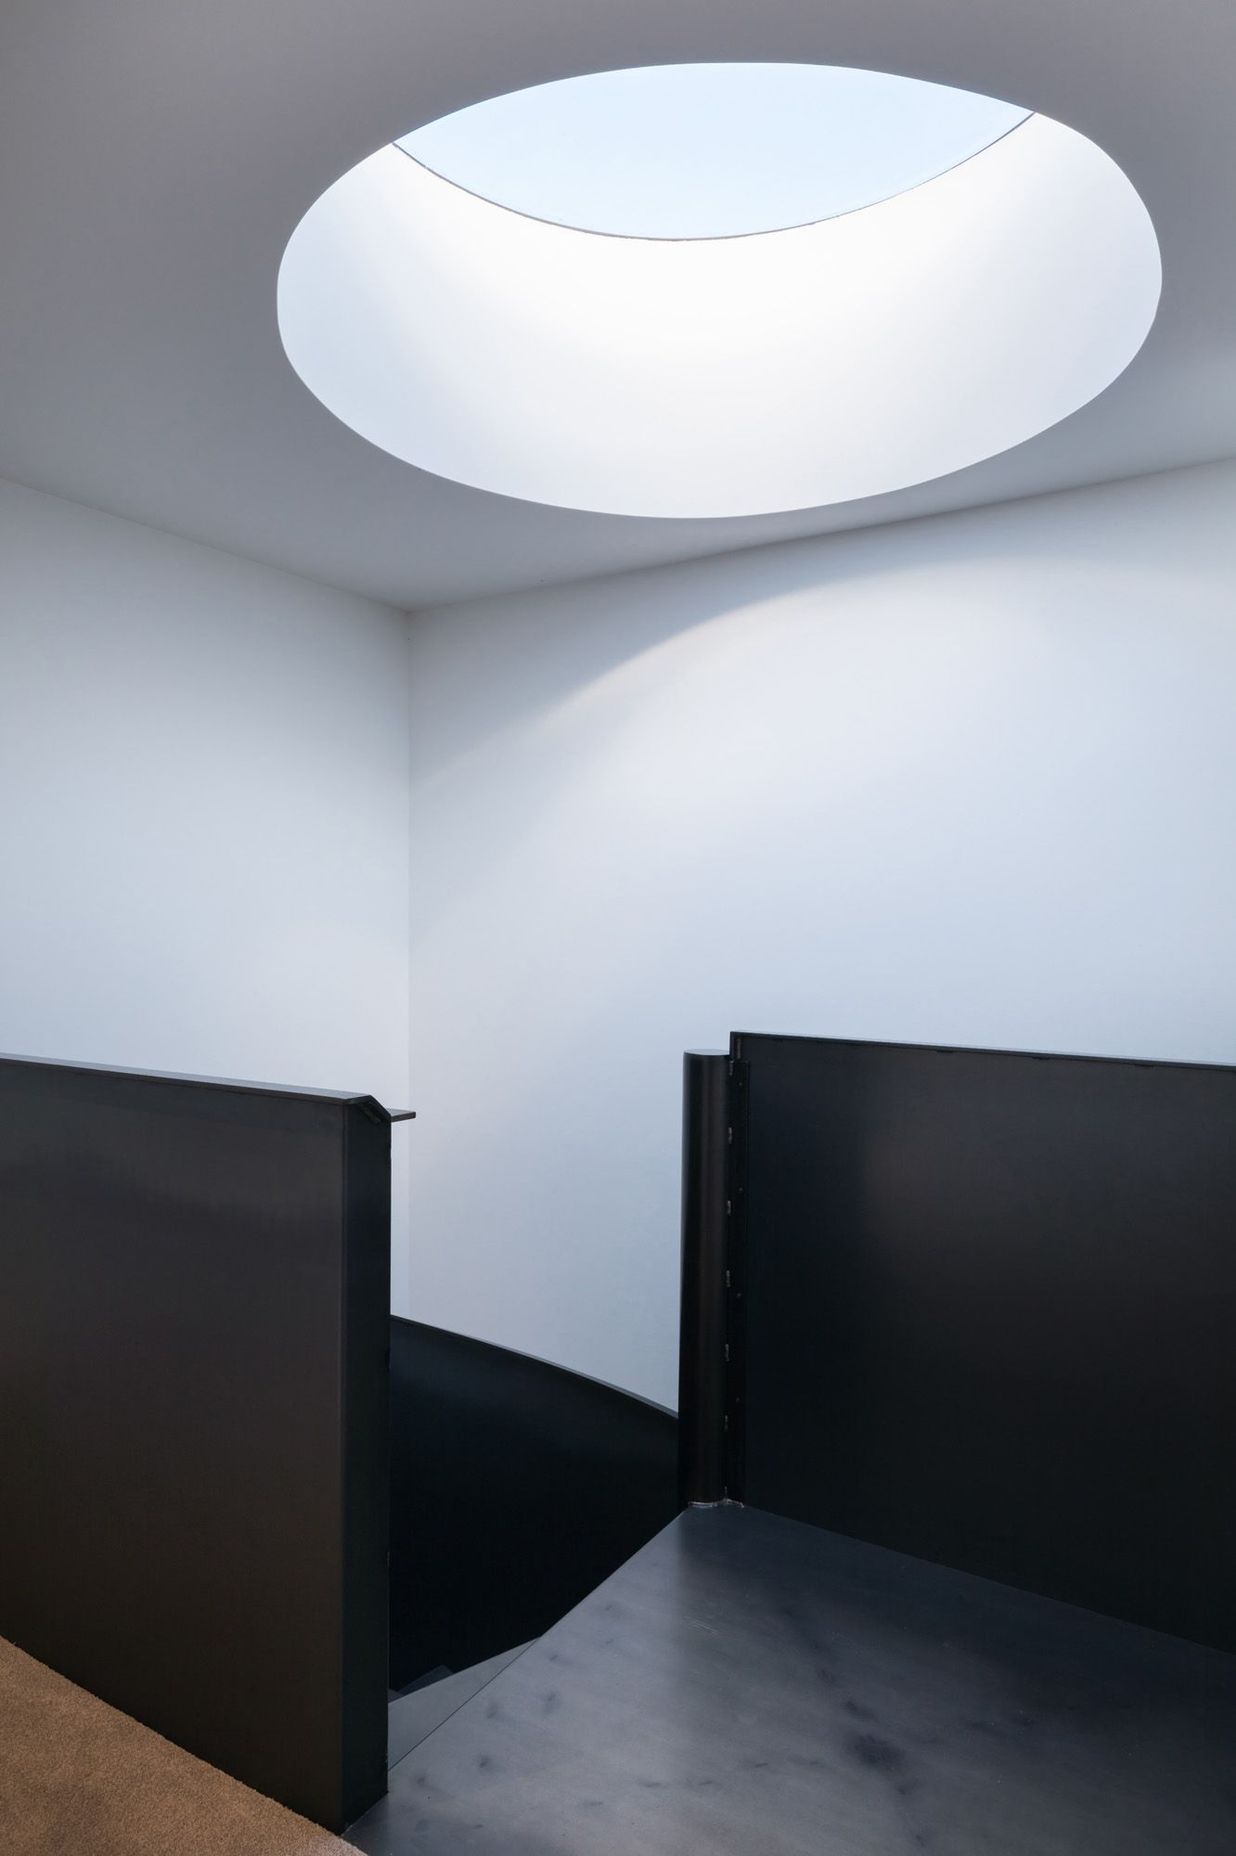 Black and white unite – an occulus in the ceiling floods light down over the staircase.